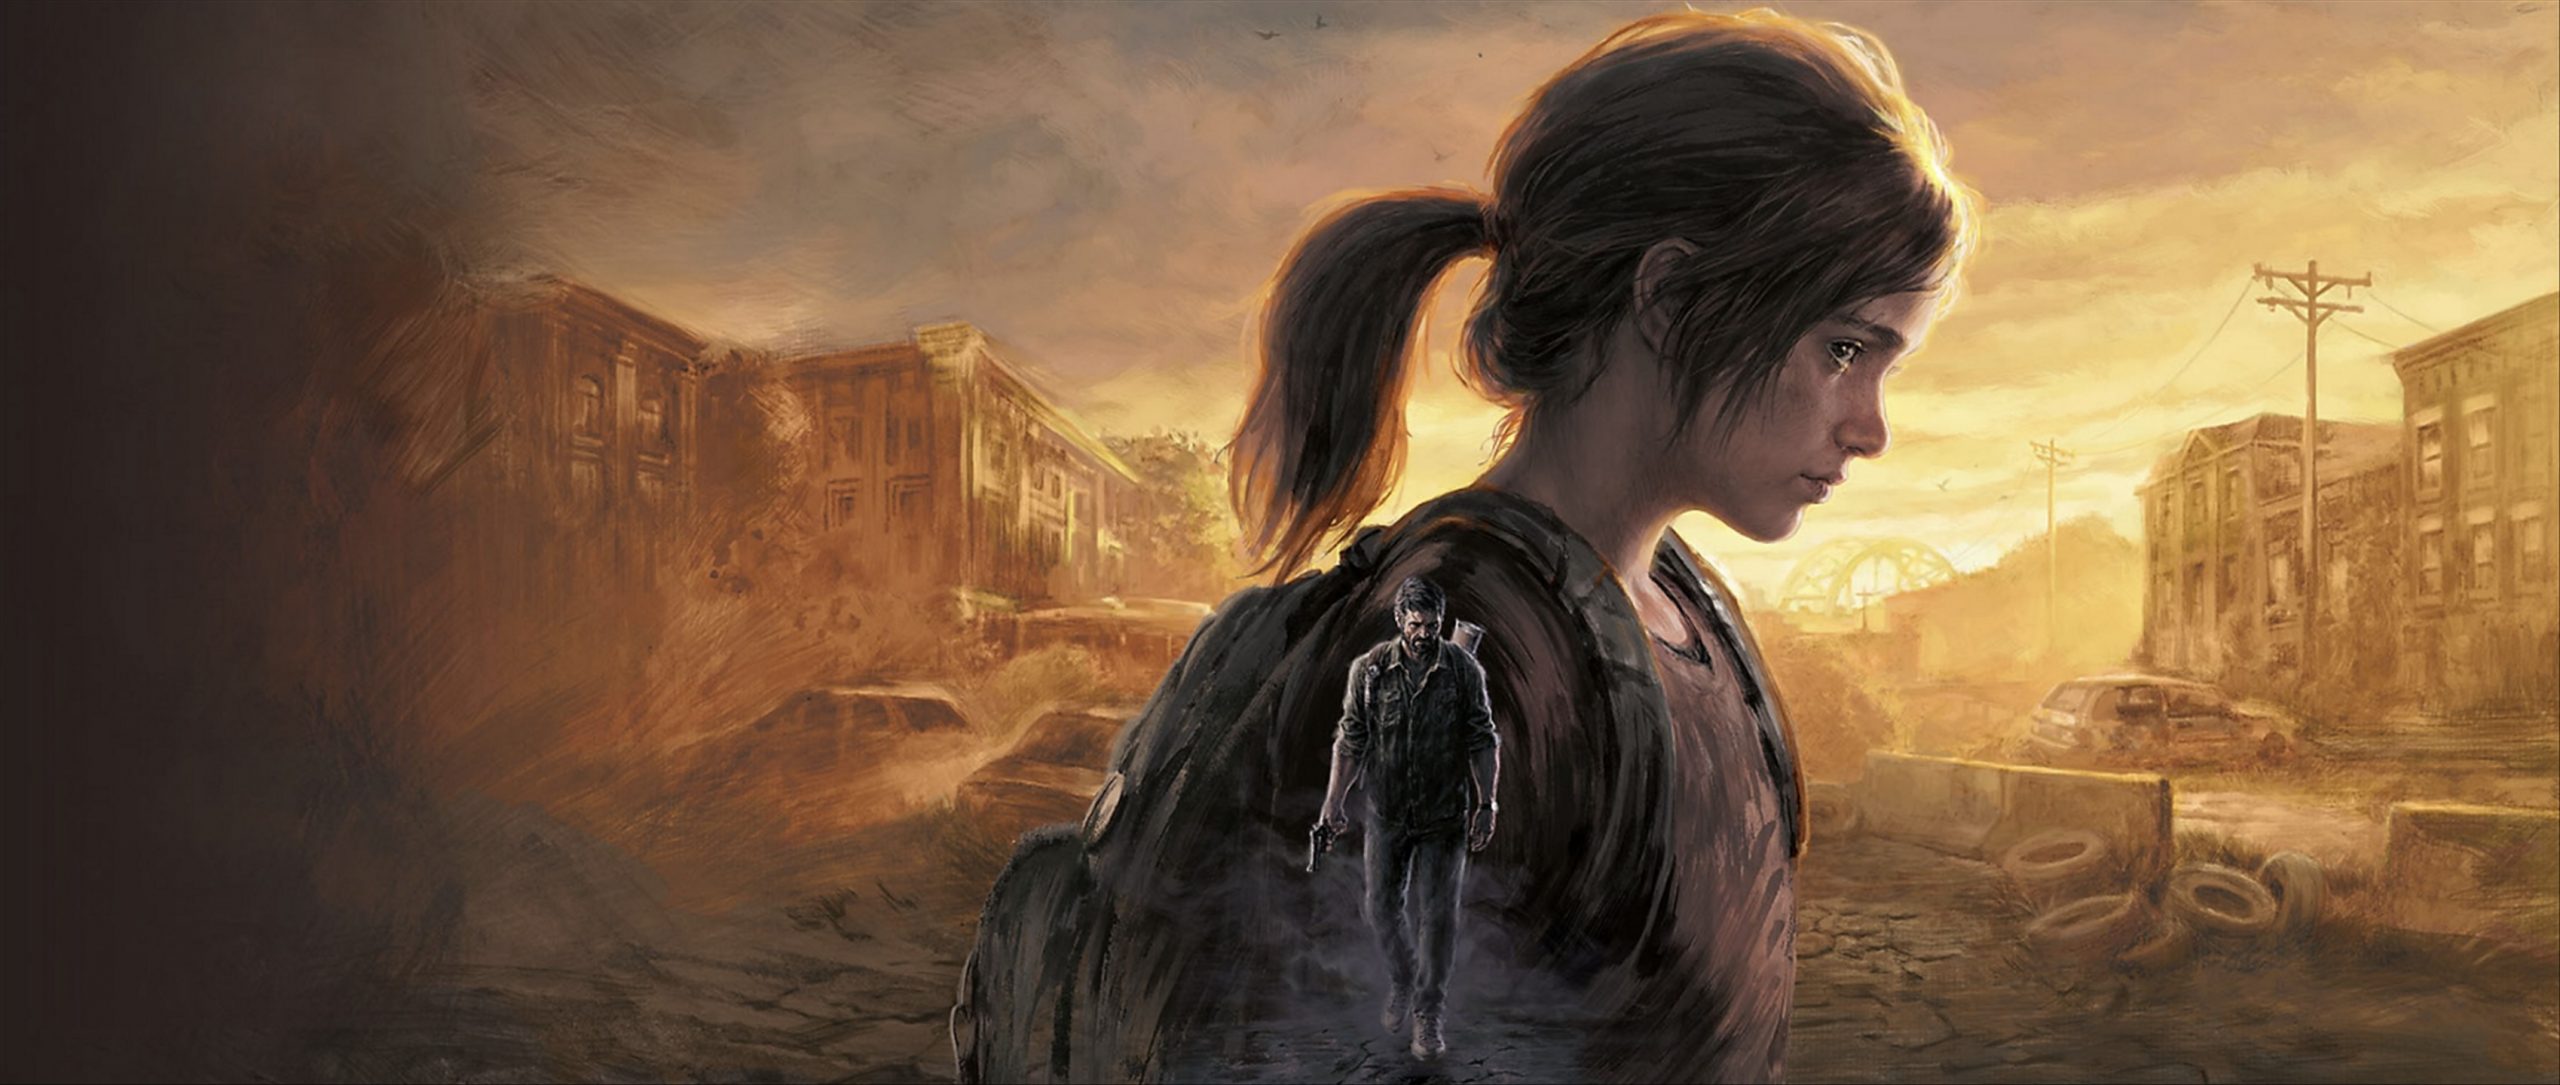 The Last of Us Part 1 review round-up: As faithful as a remake can